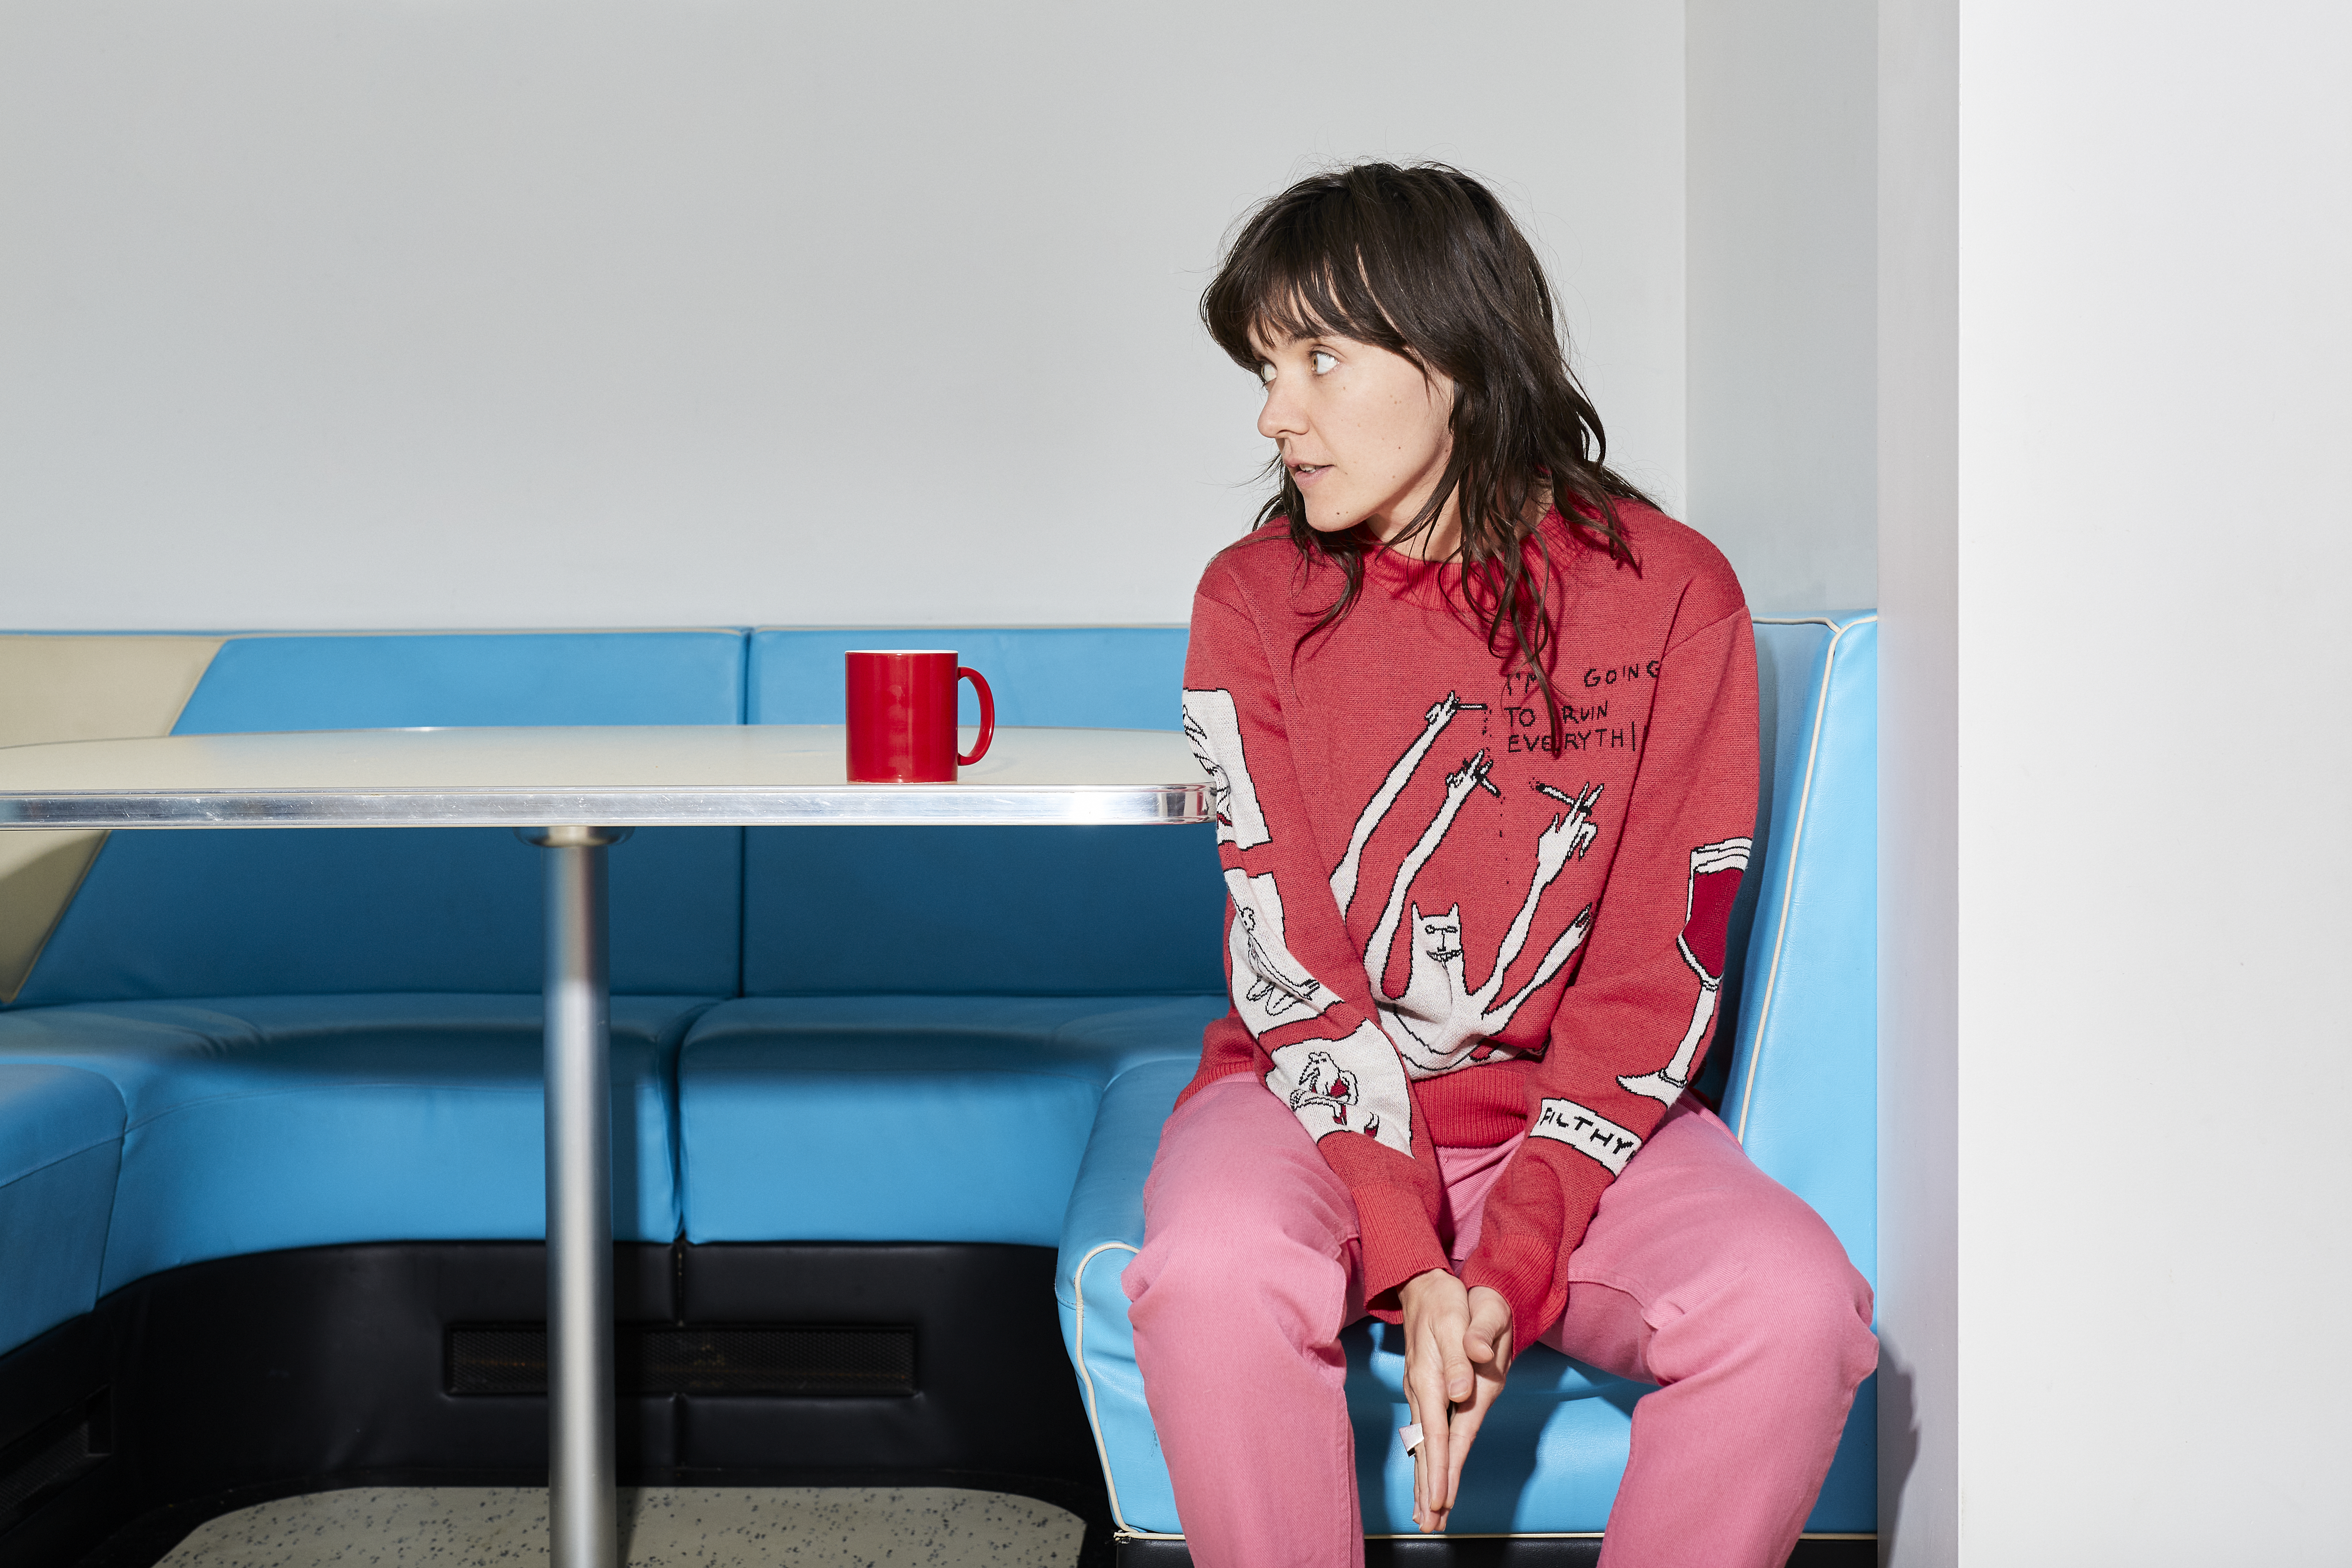 Seated in a blue booth, wearing a red shirt, Courtney Barnett looks off to the left